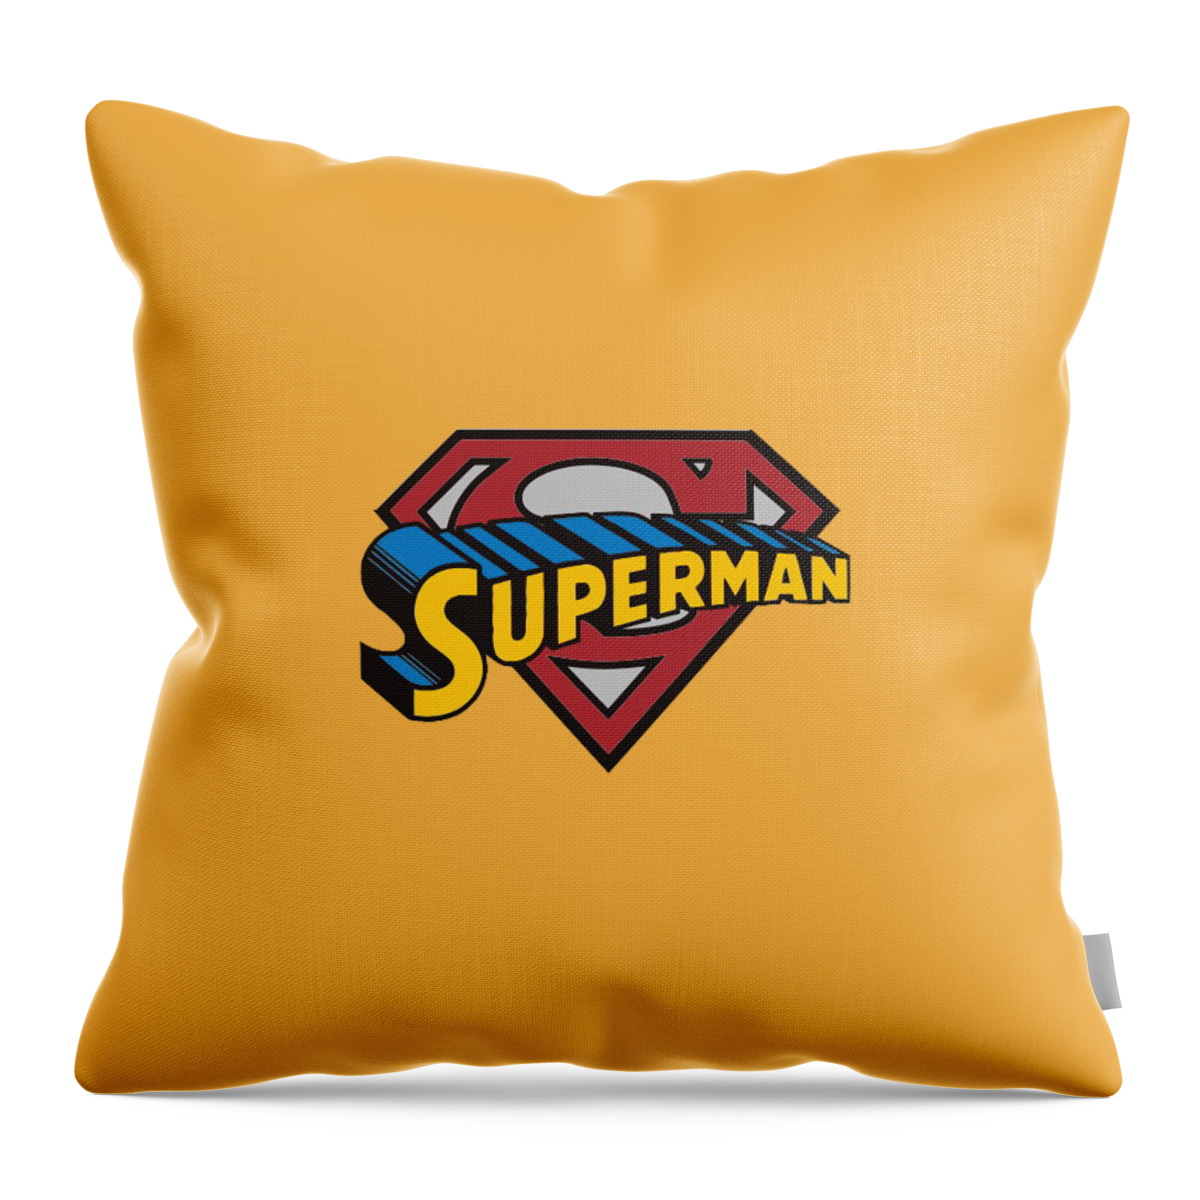 Superman Throw Pillow featuring the painting Superman T-shirt by Herb Strobino